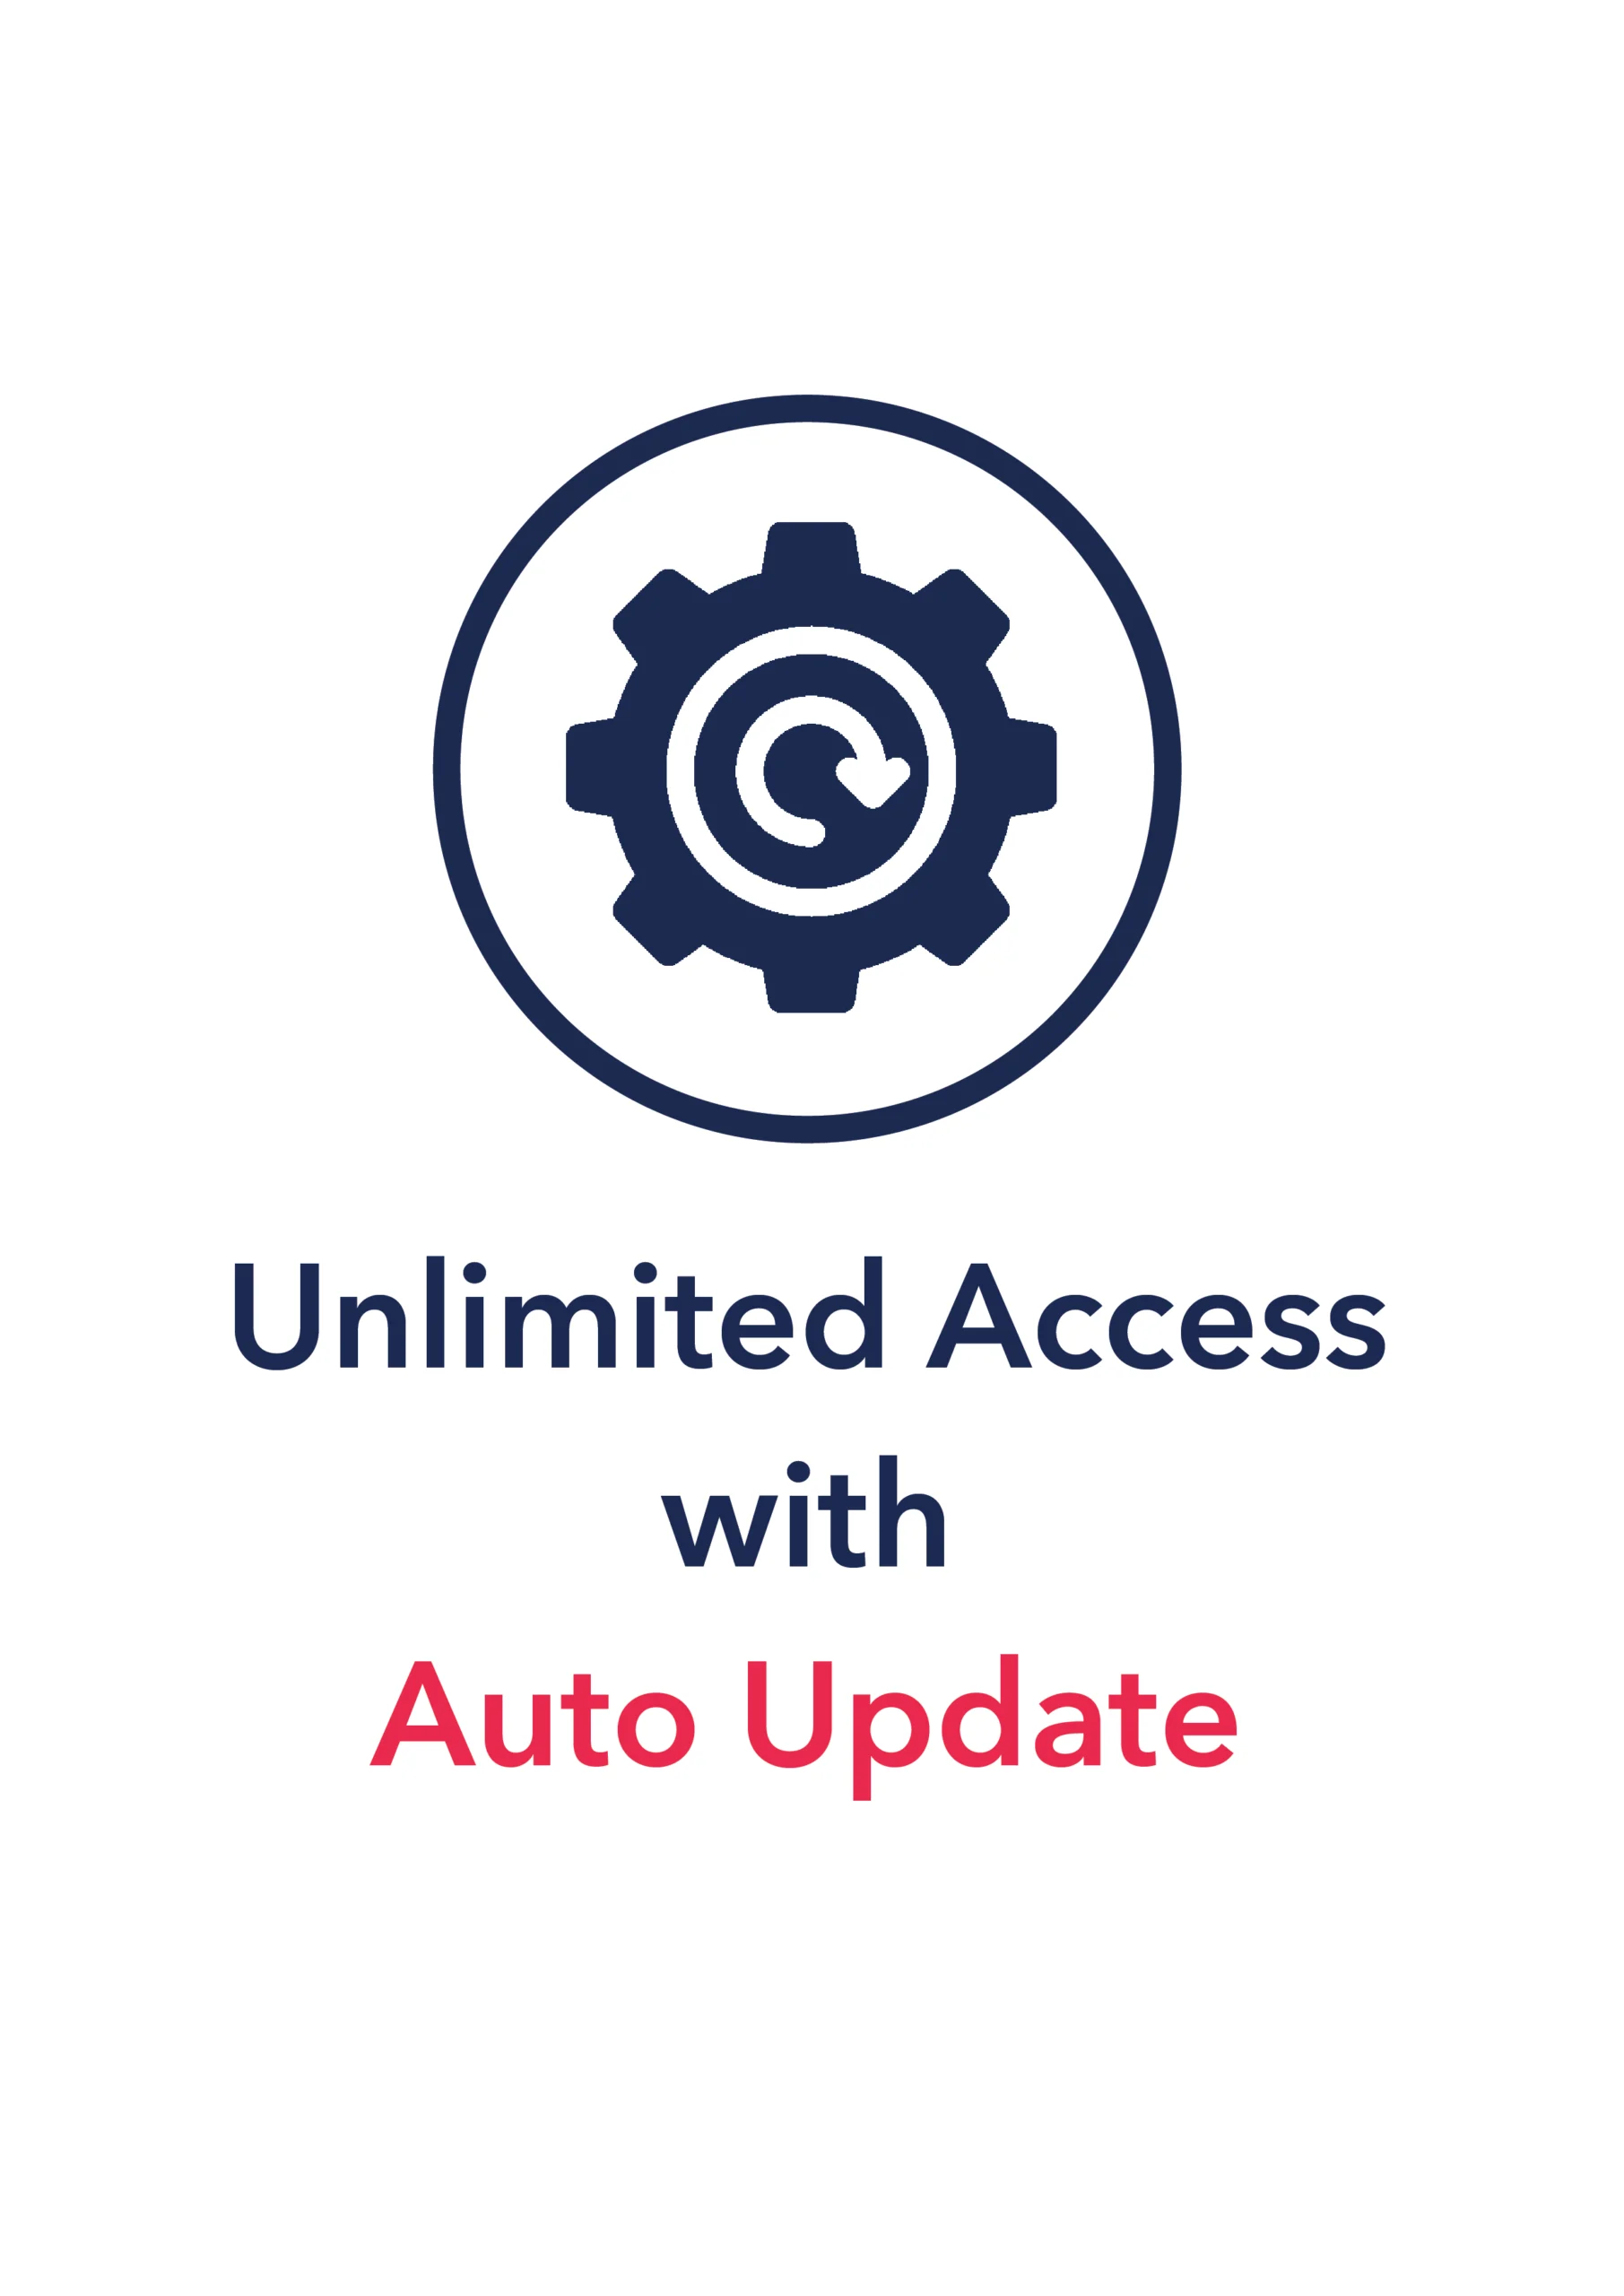 unlimited Access with Auto updates